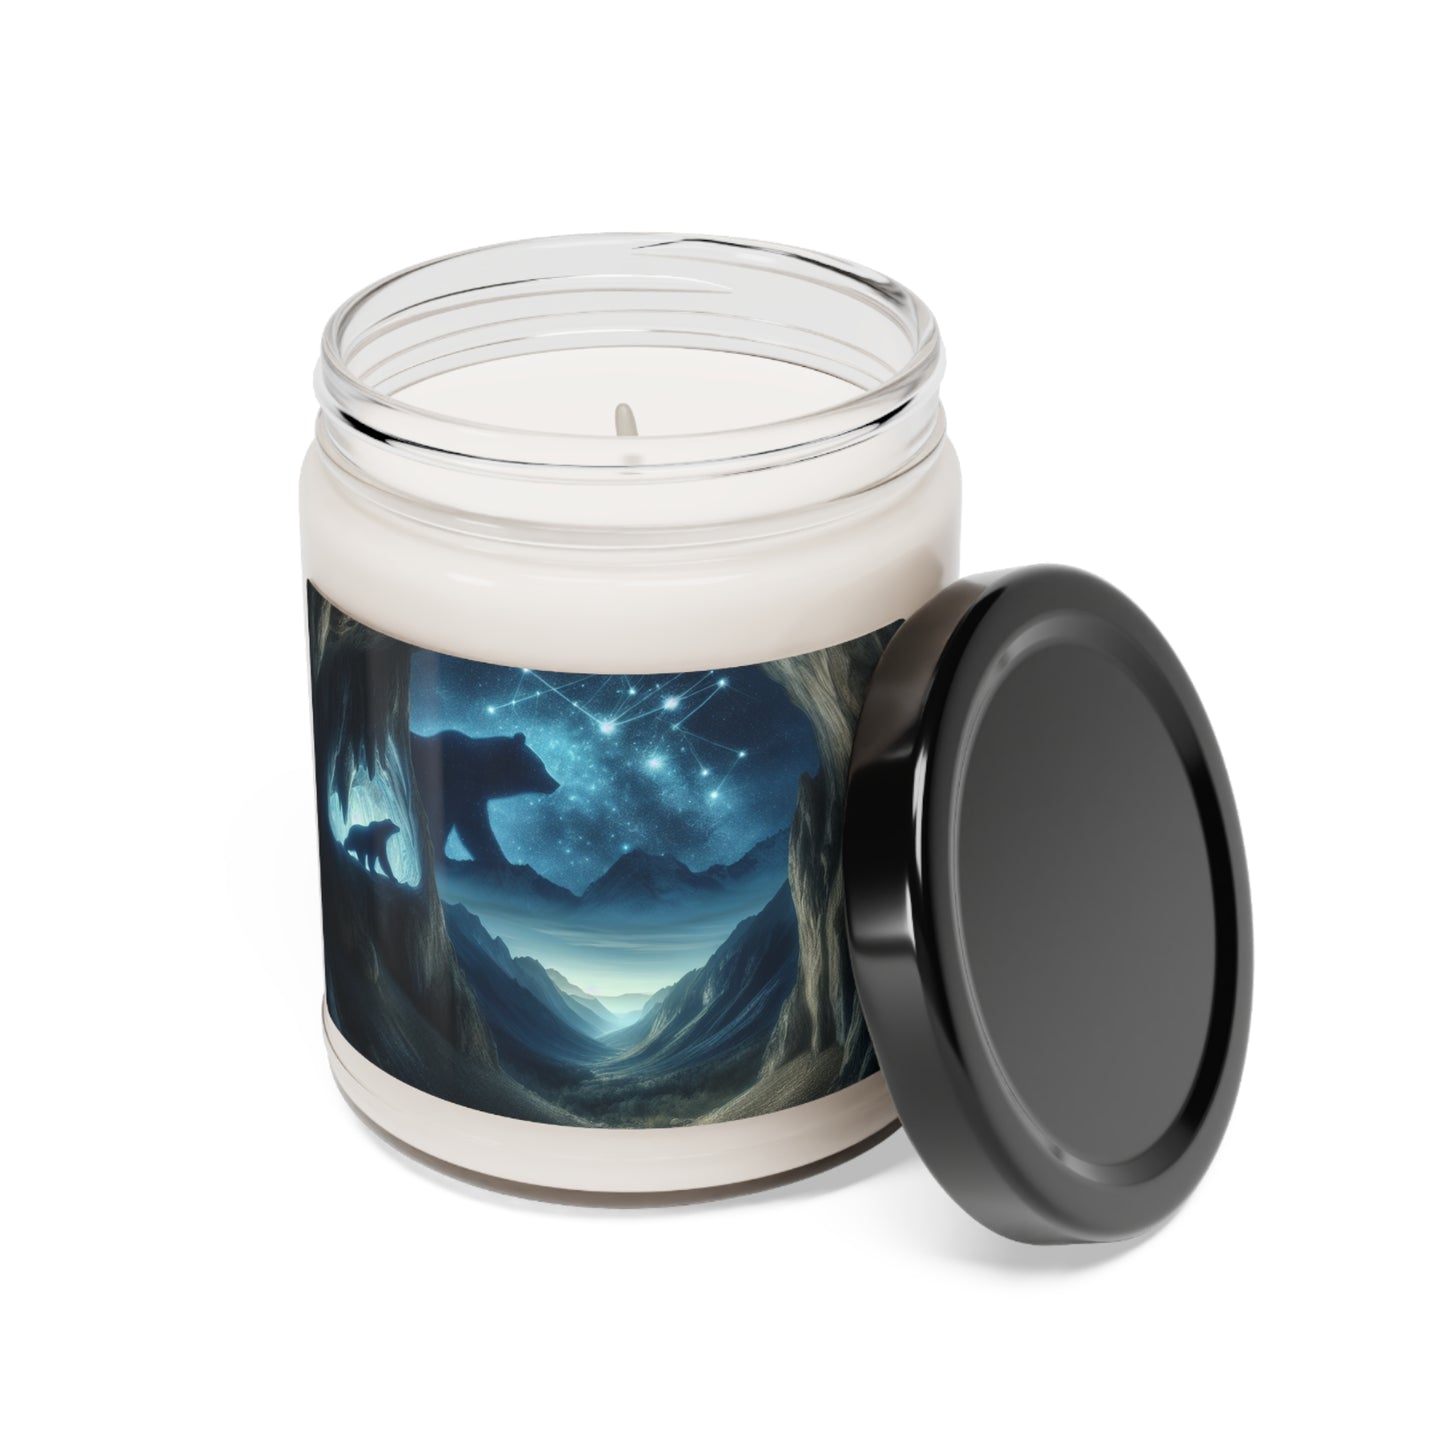 "The Bear and the Cosmic Balance" - The Alien Scented Soy Candle 9oz Cave Painting Style